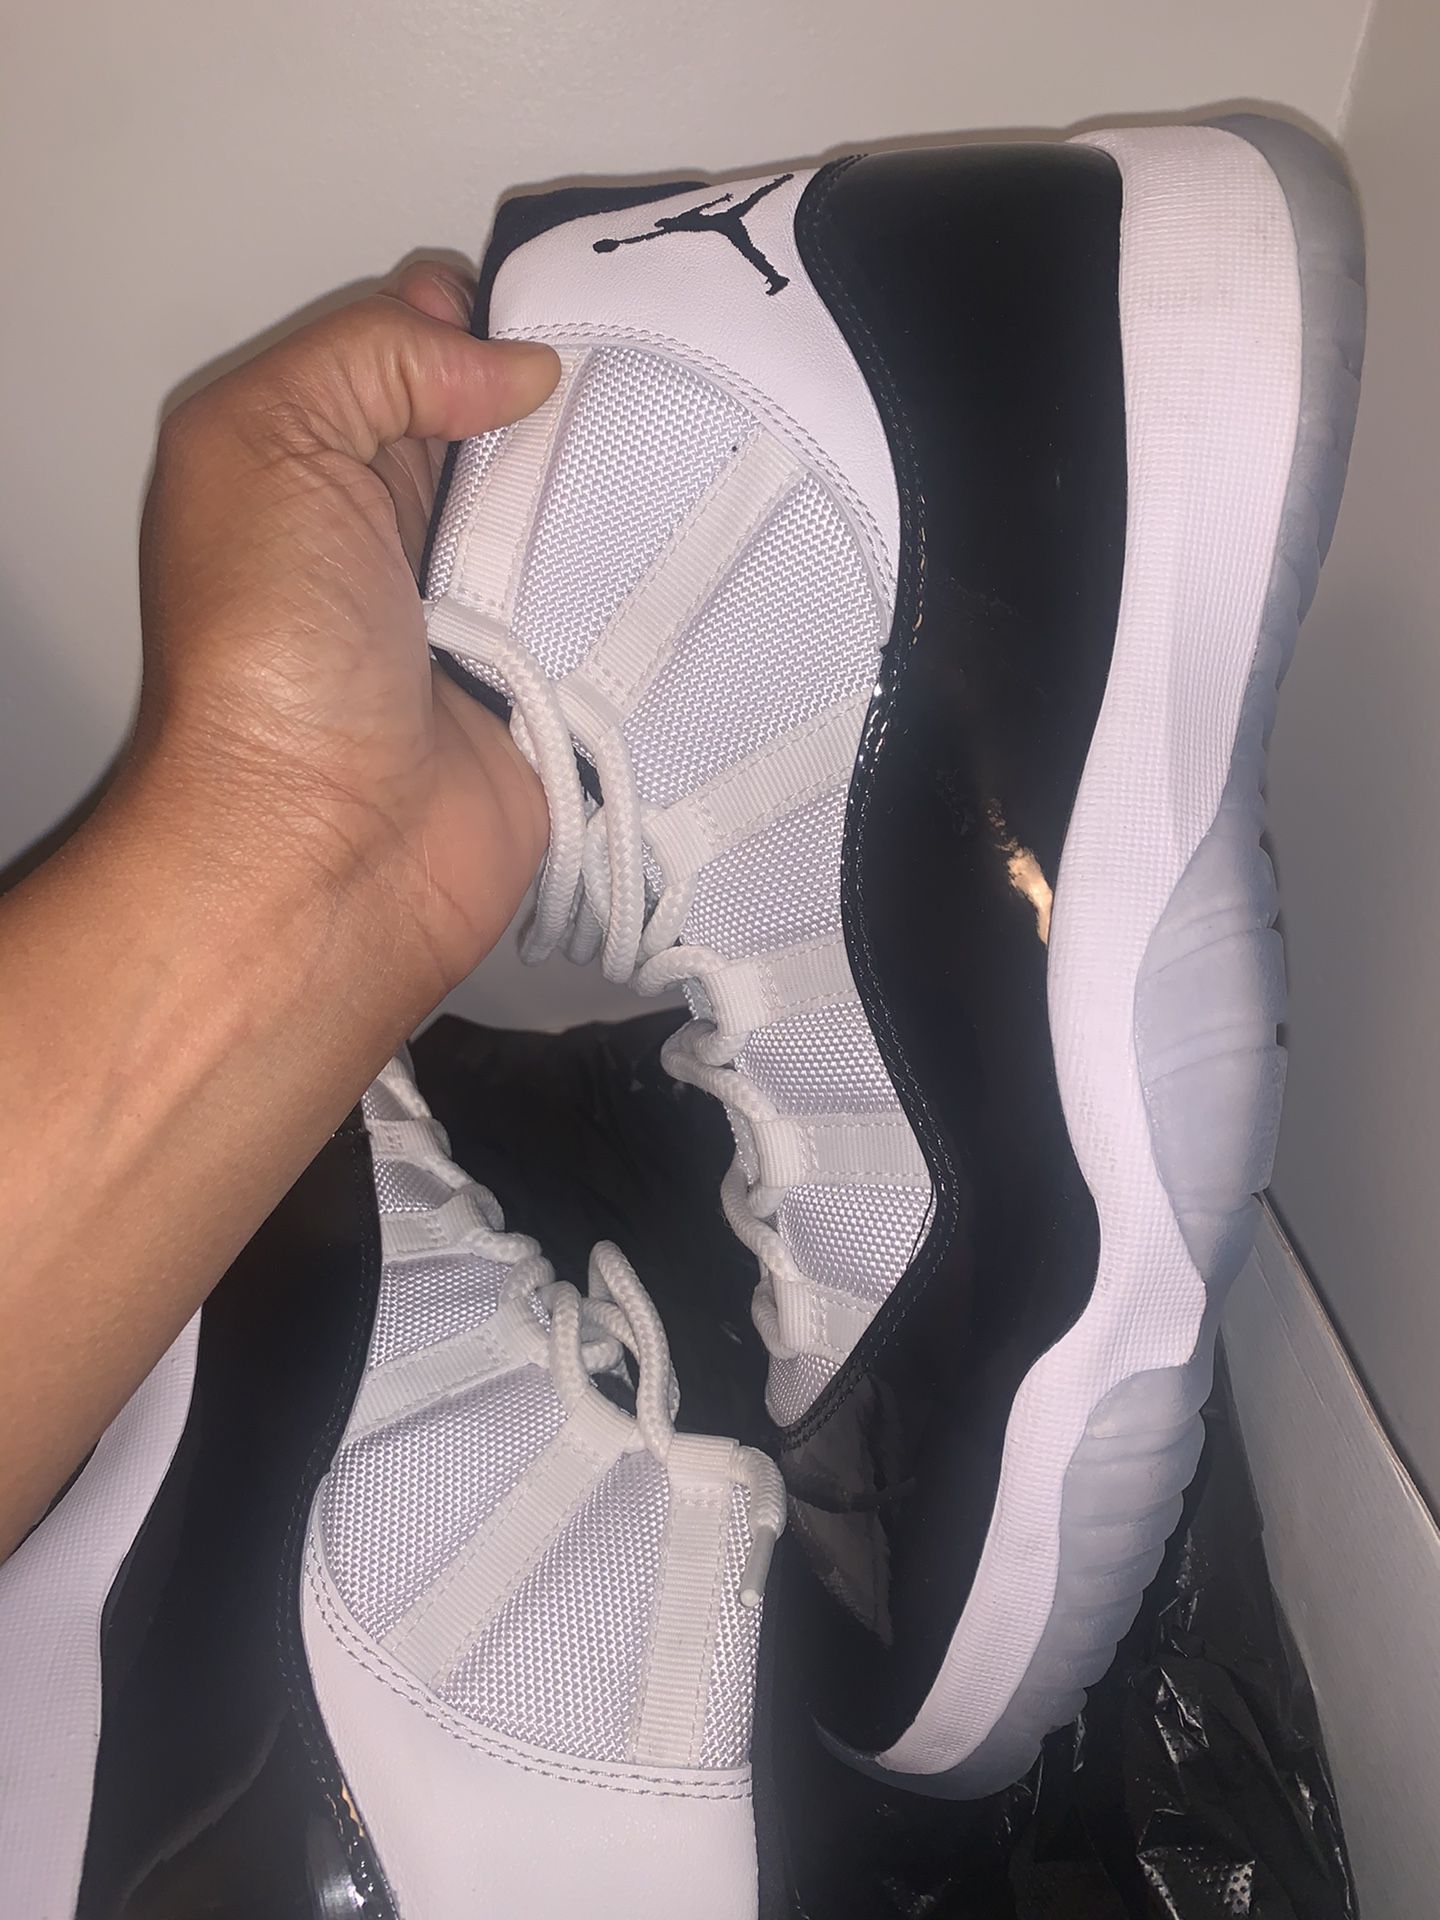 Size 10.5 concords, worn 2x, no wear on soles